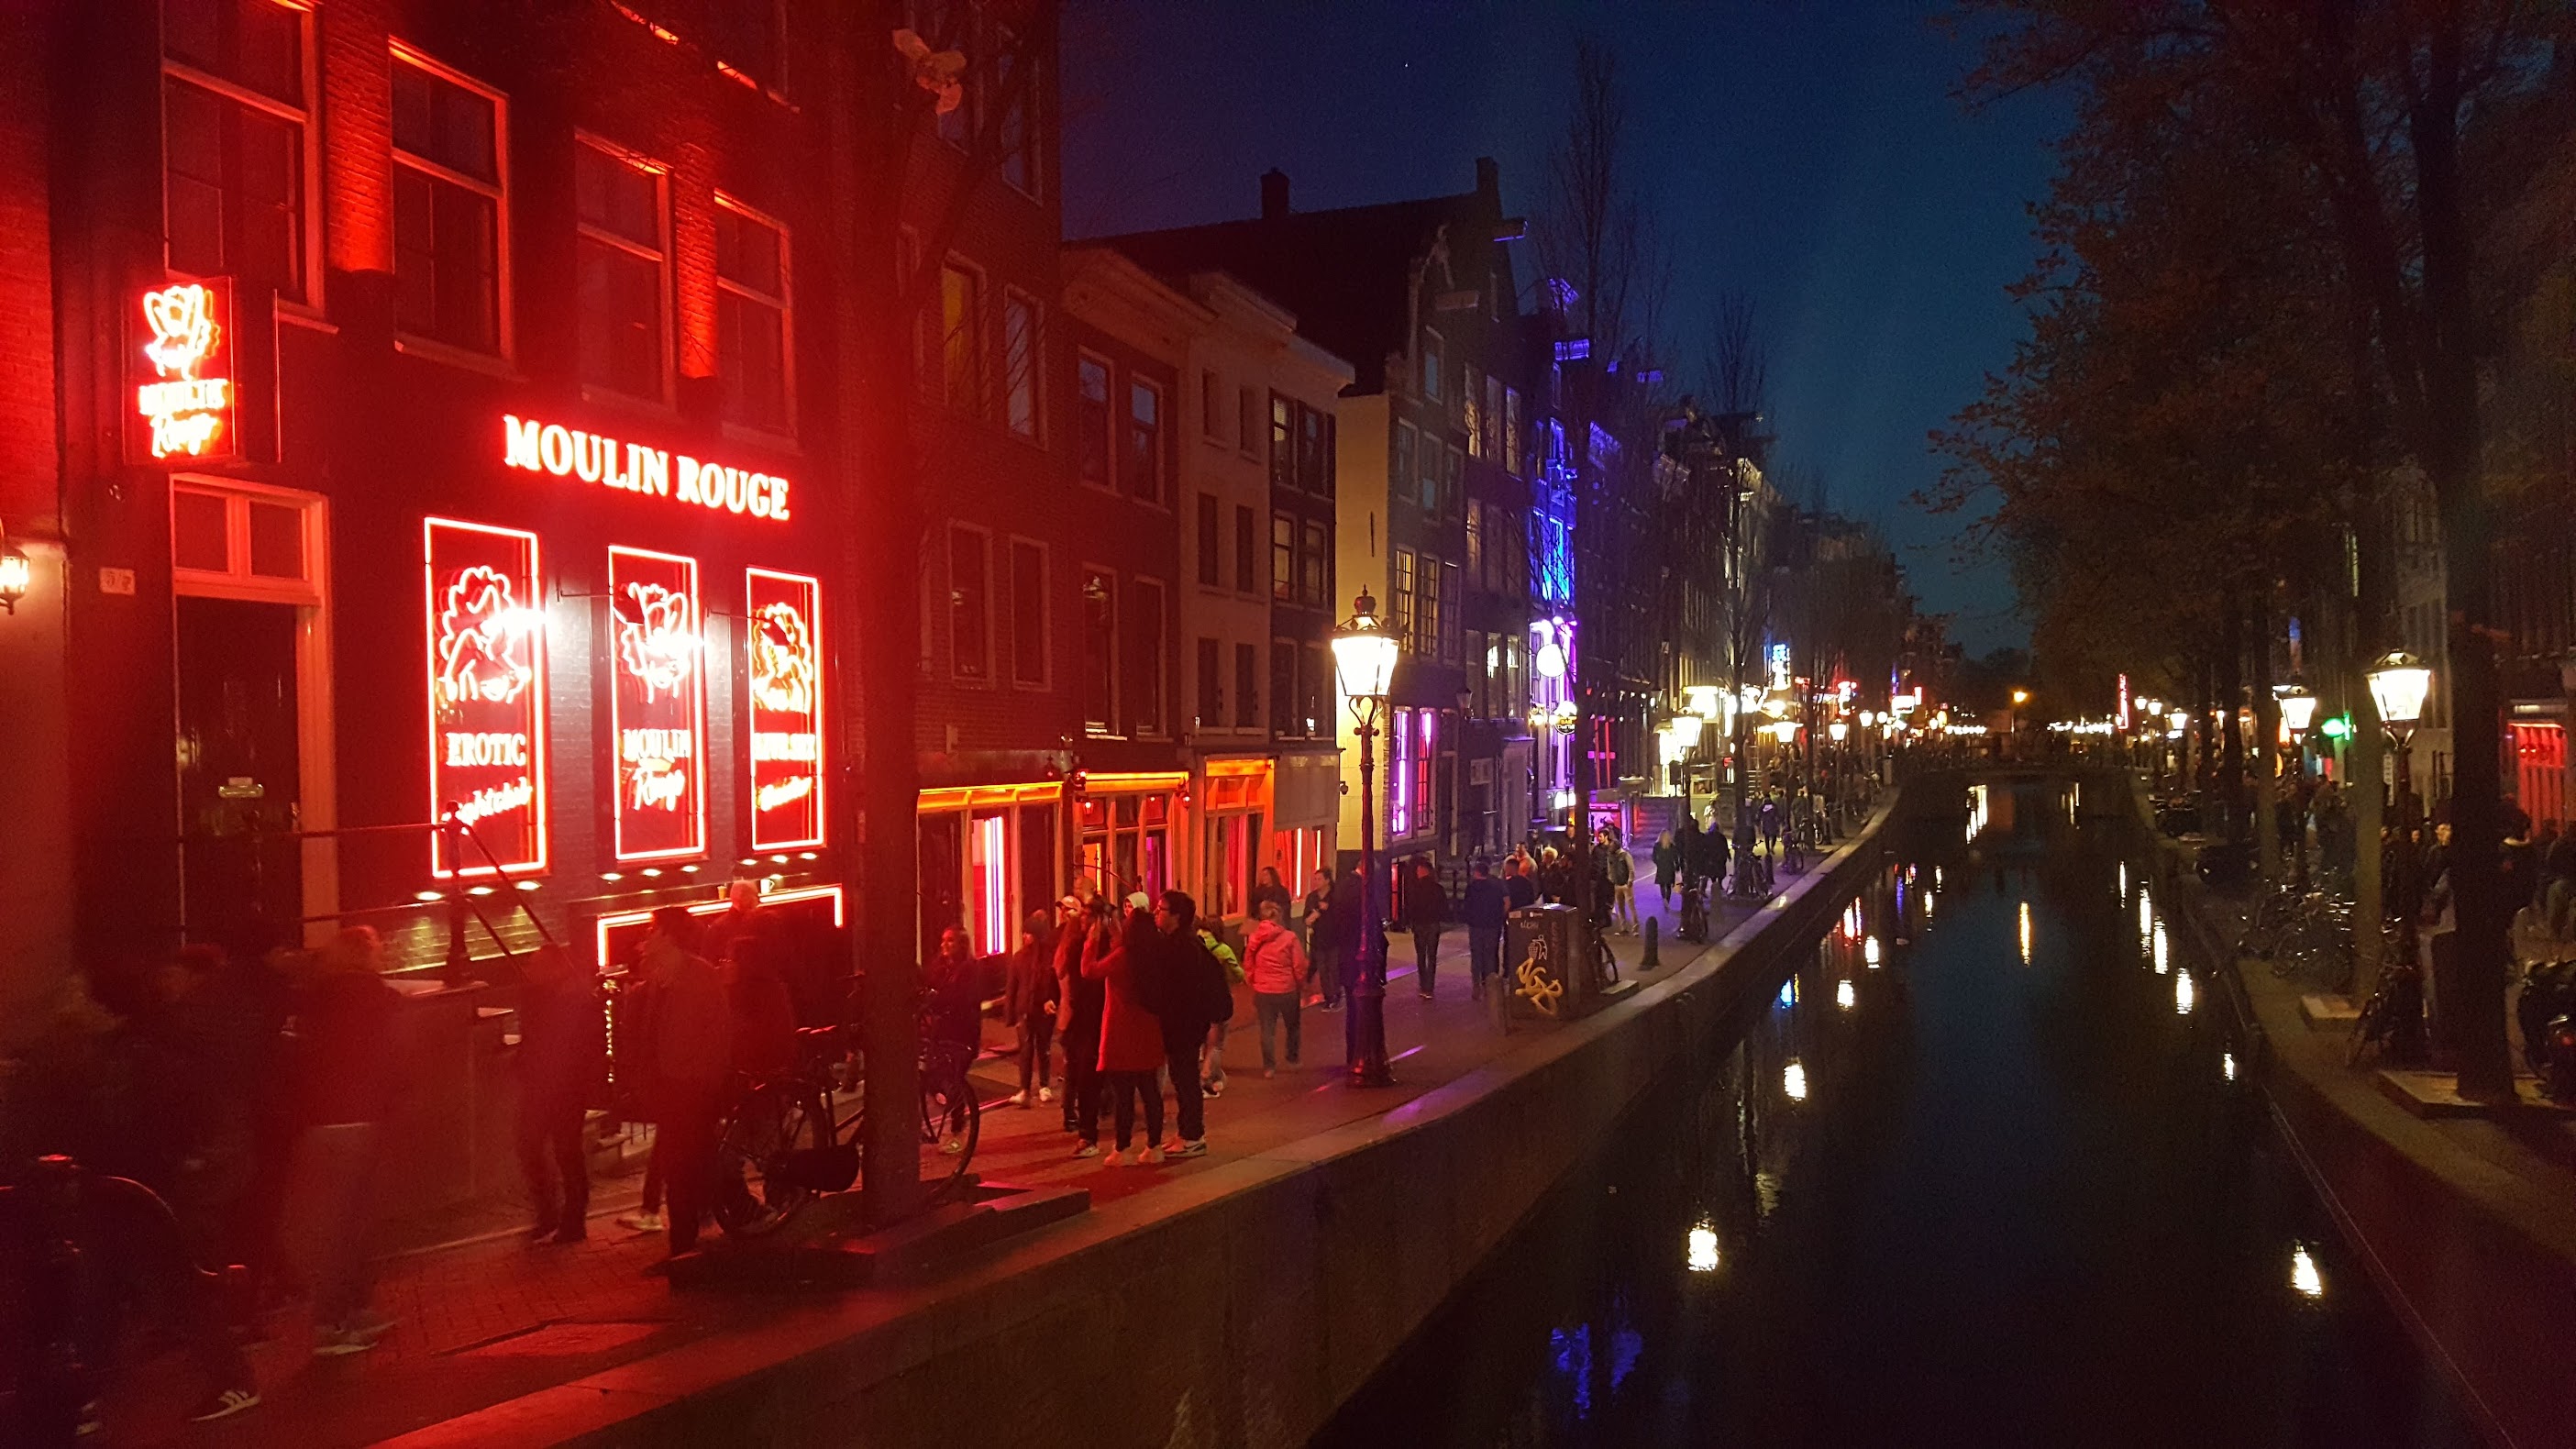 The Red Light District Amsterdam